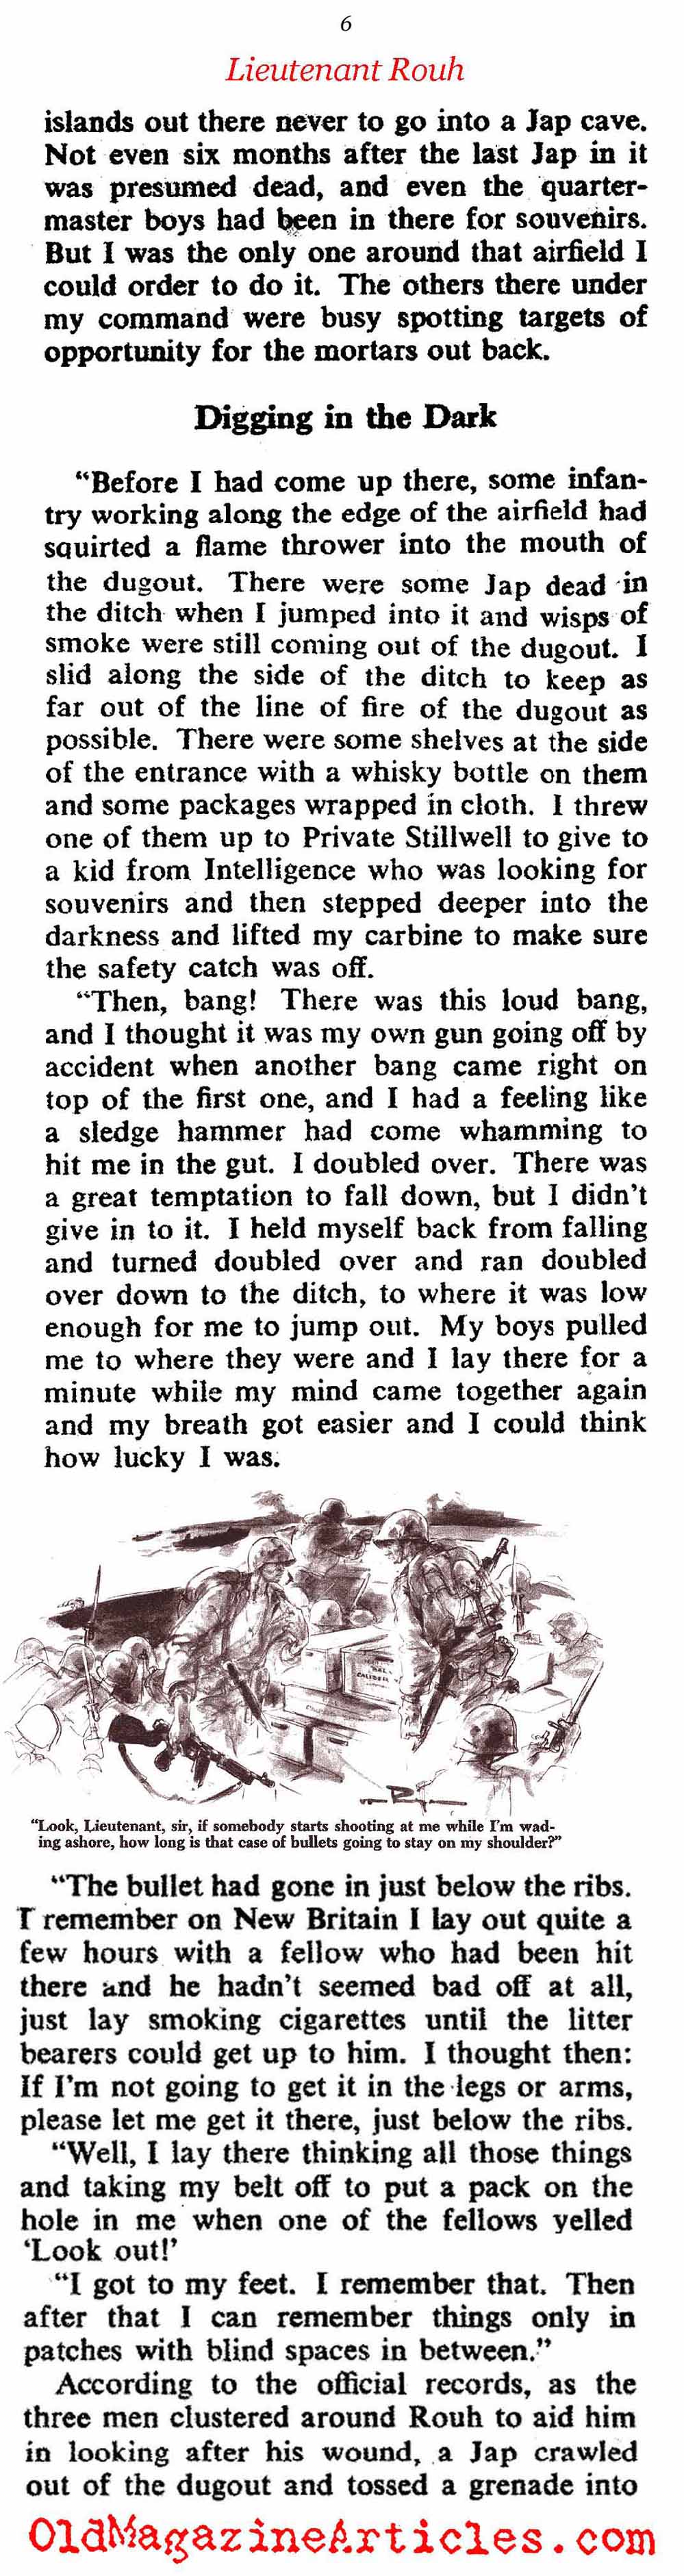 A W.W. II Hero Speaks Out About Heroes and Heroism (Collier's, 1945)